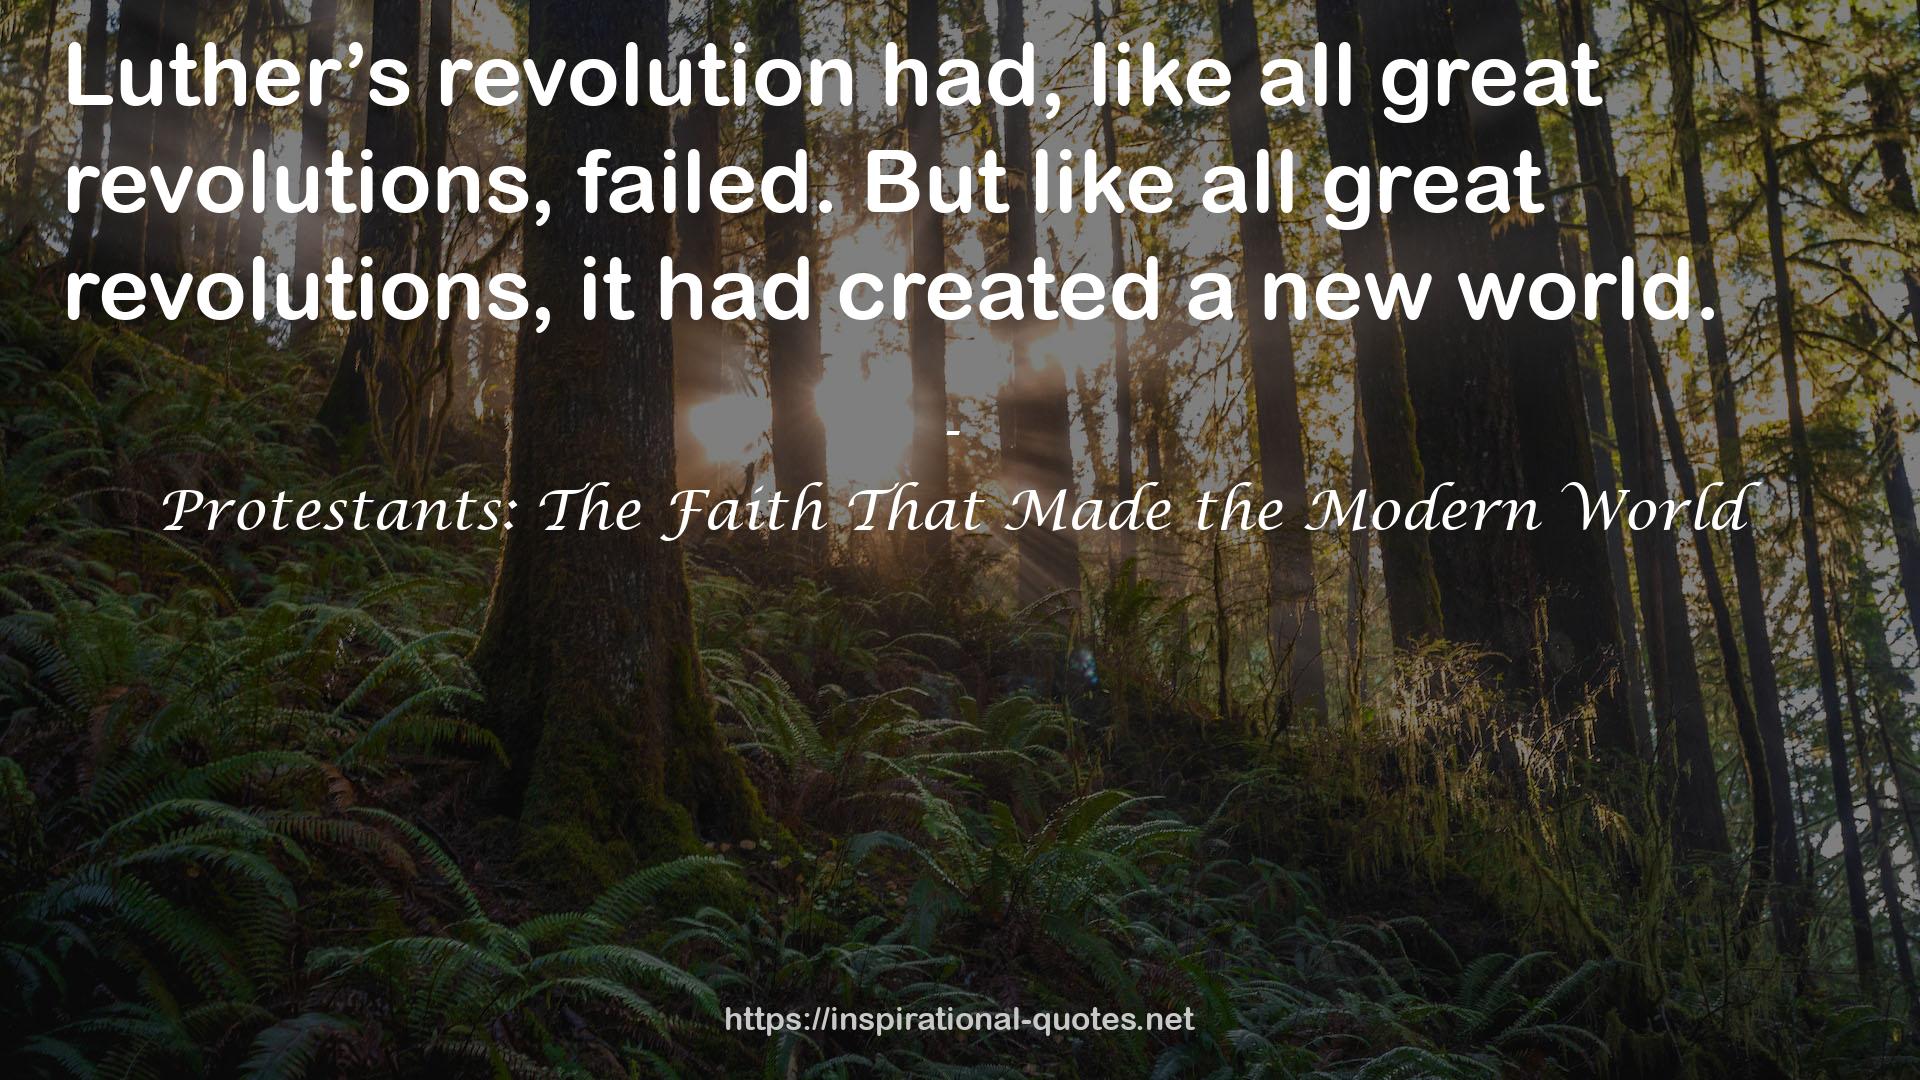 Protestants: The Faith That Made the Modern World QUOTES